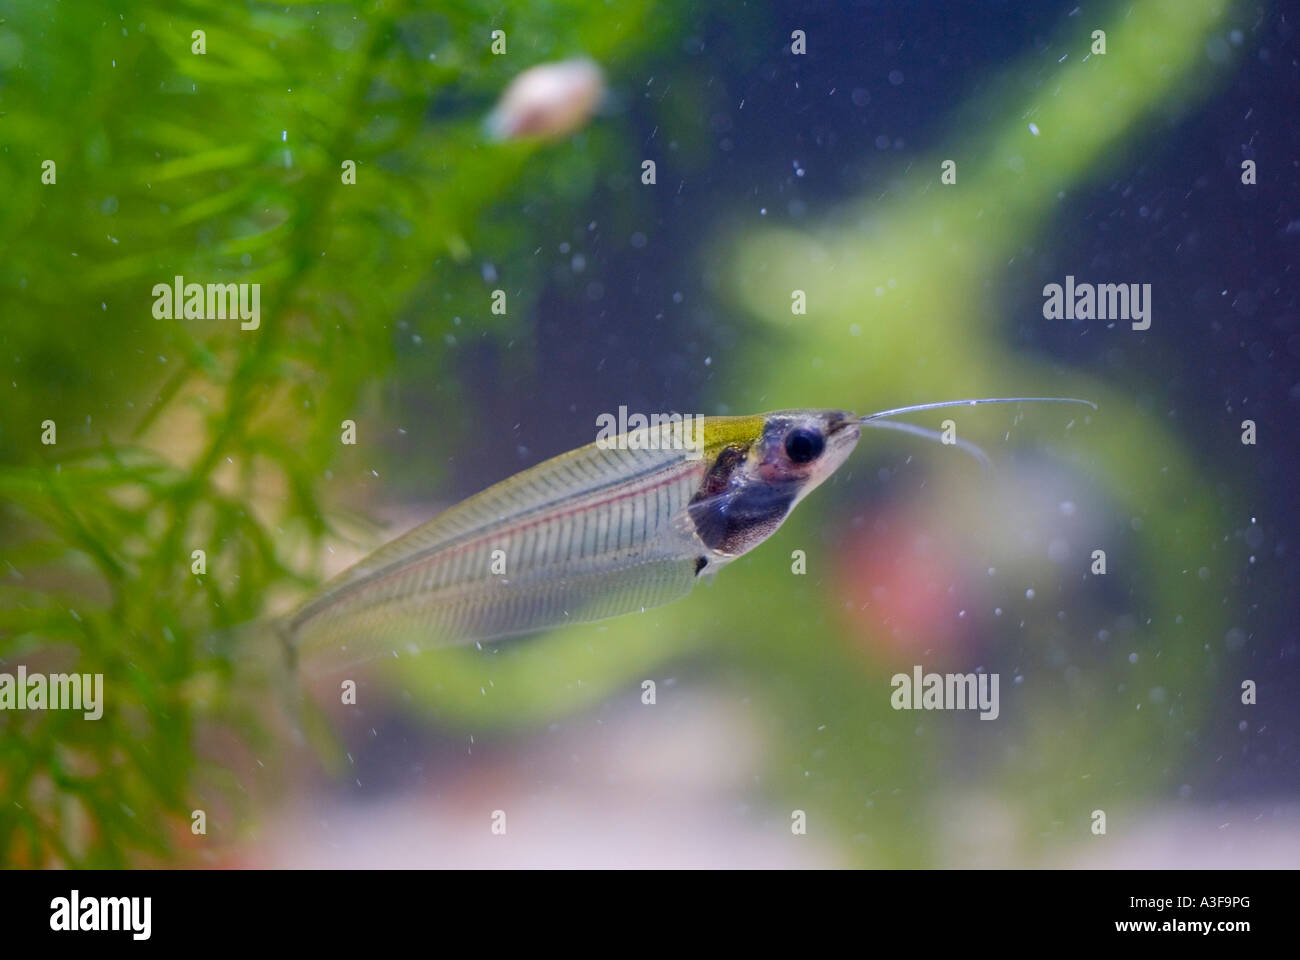 Ghost or glass catfish in tropical home freshwater aquarium Stock Photo